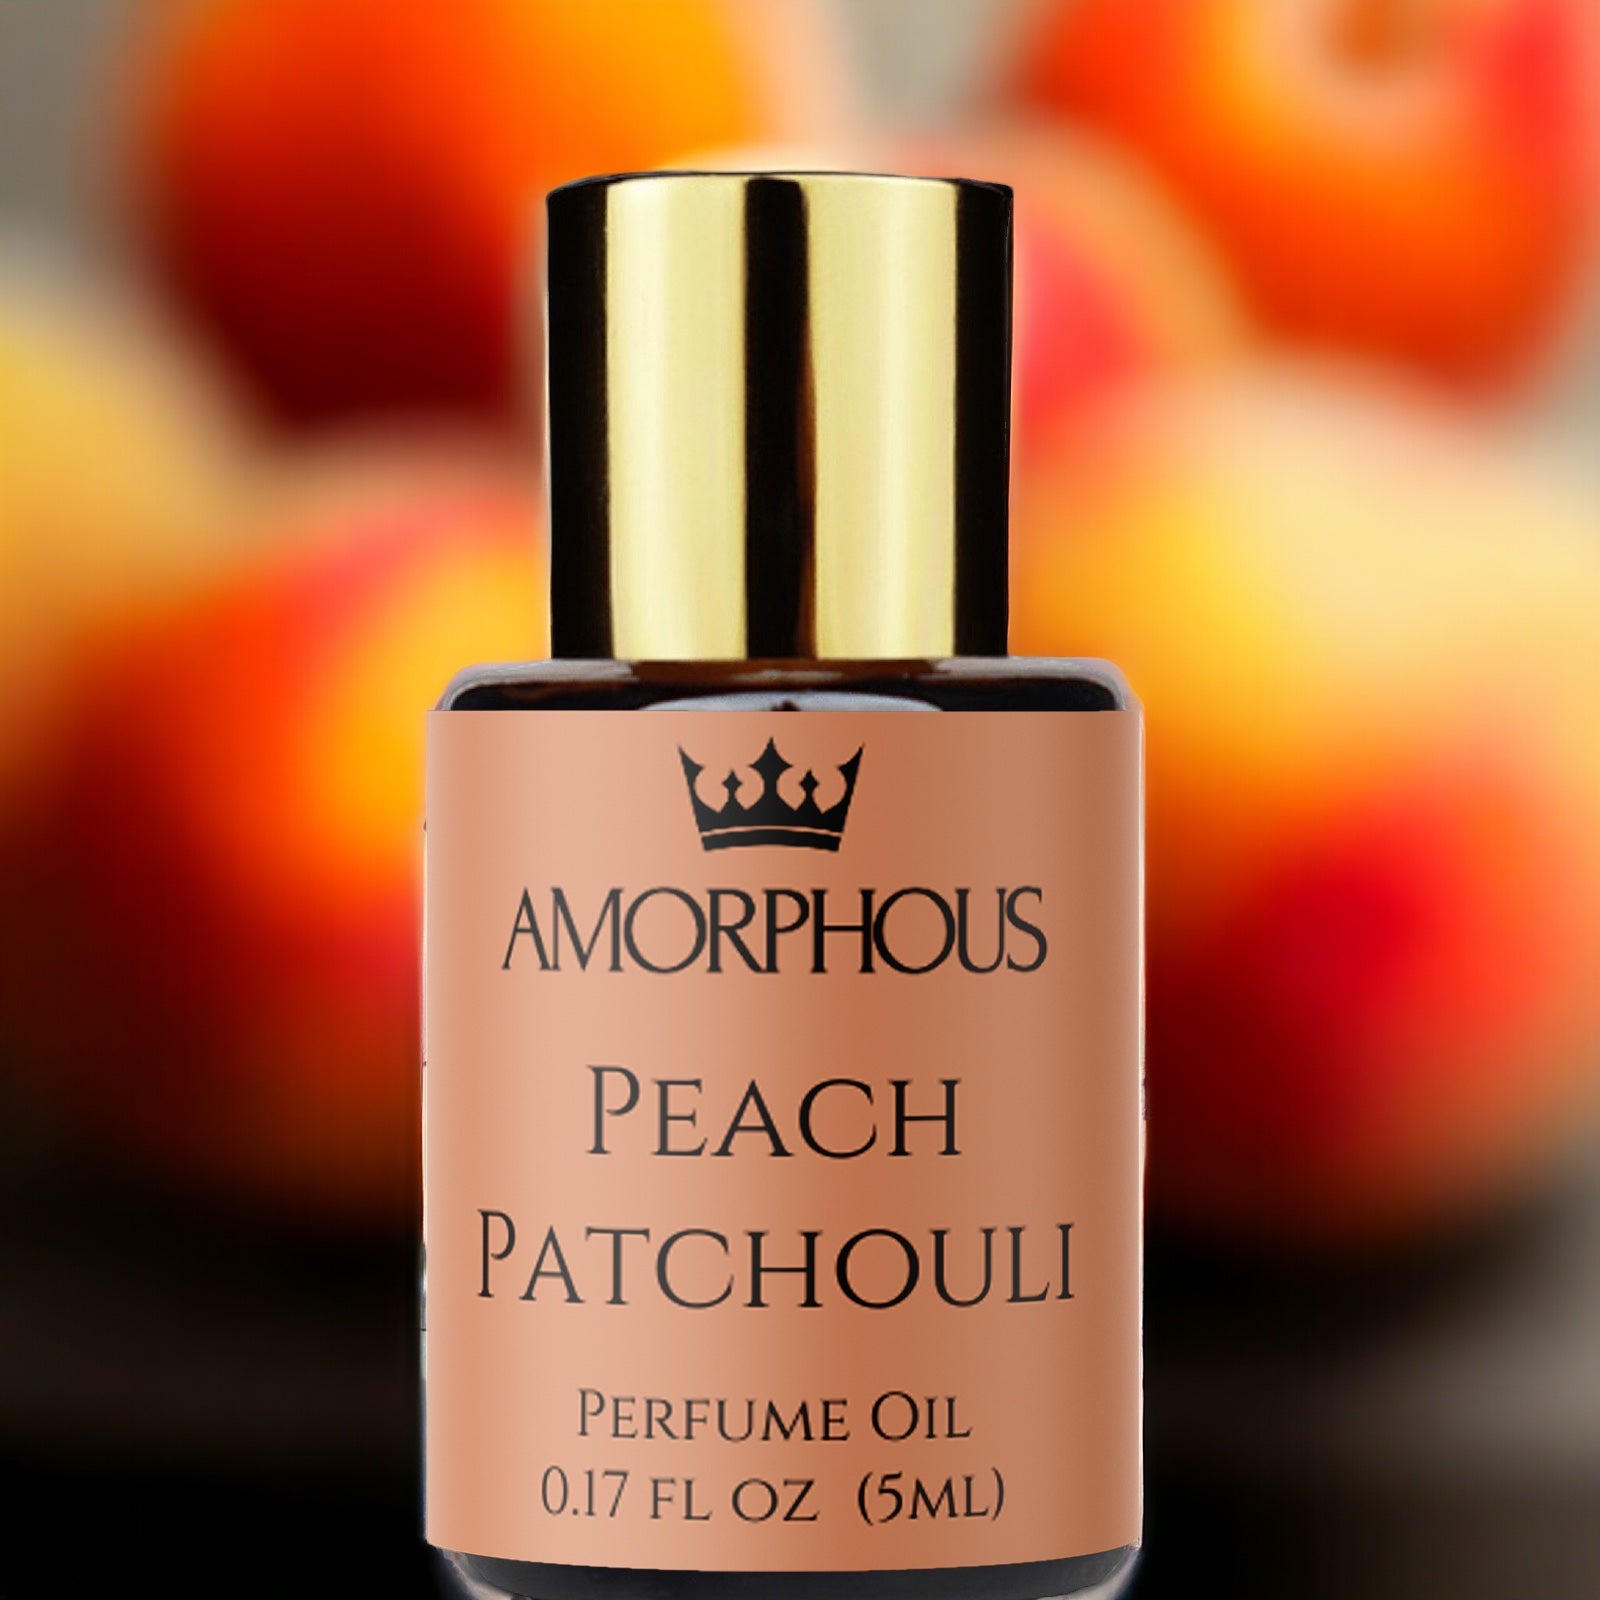 patchouli and peach perfume